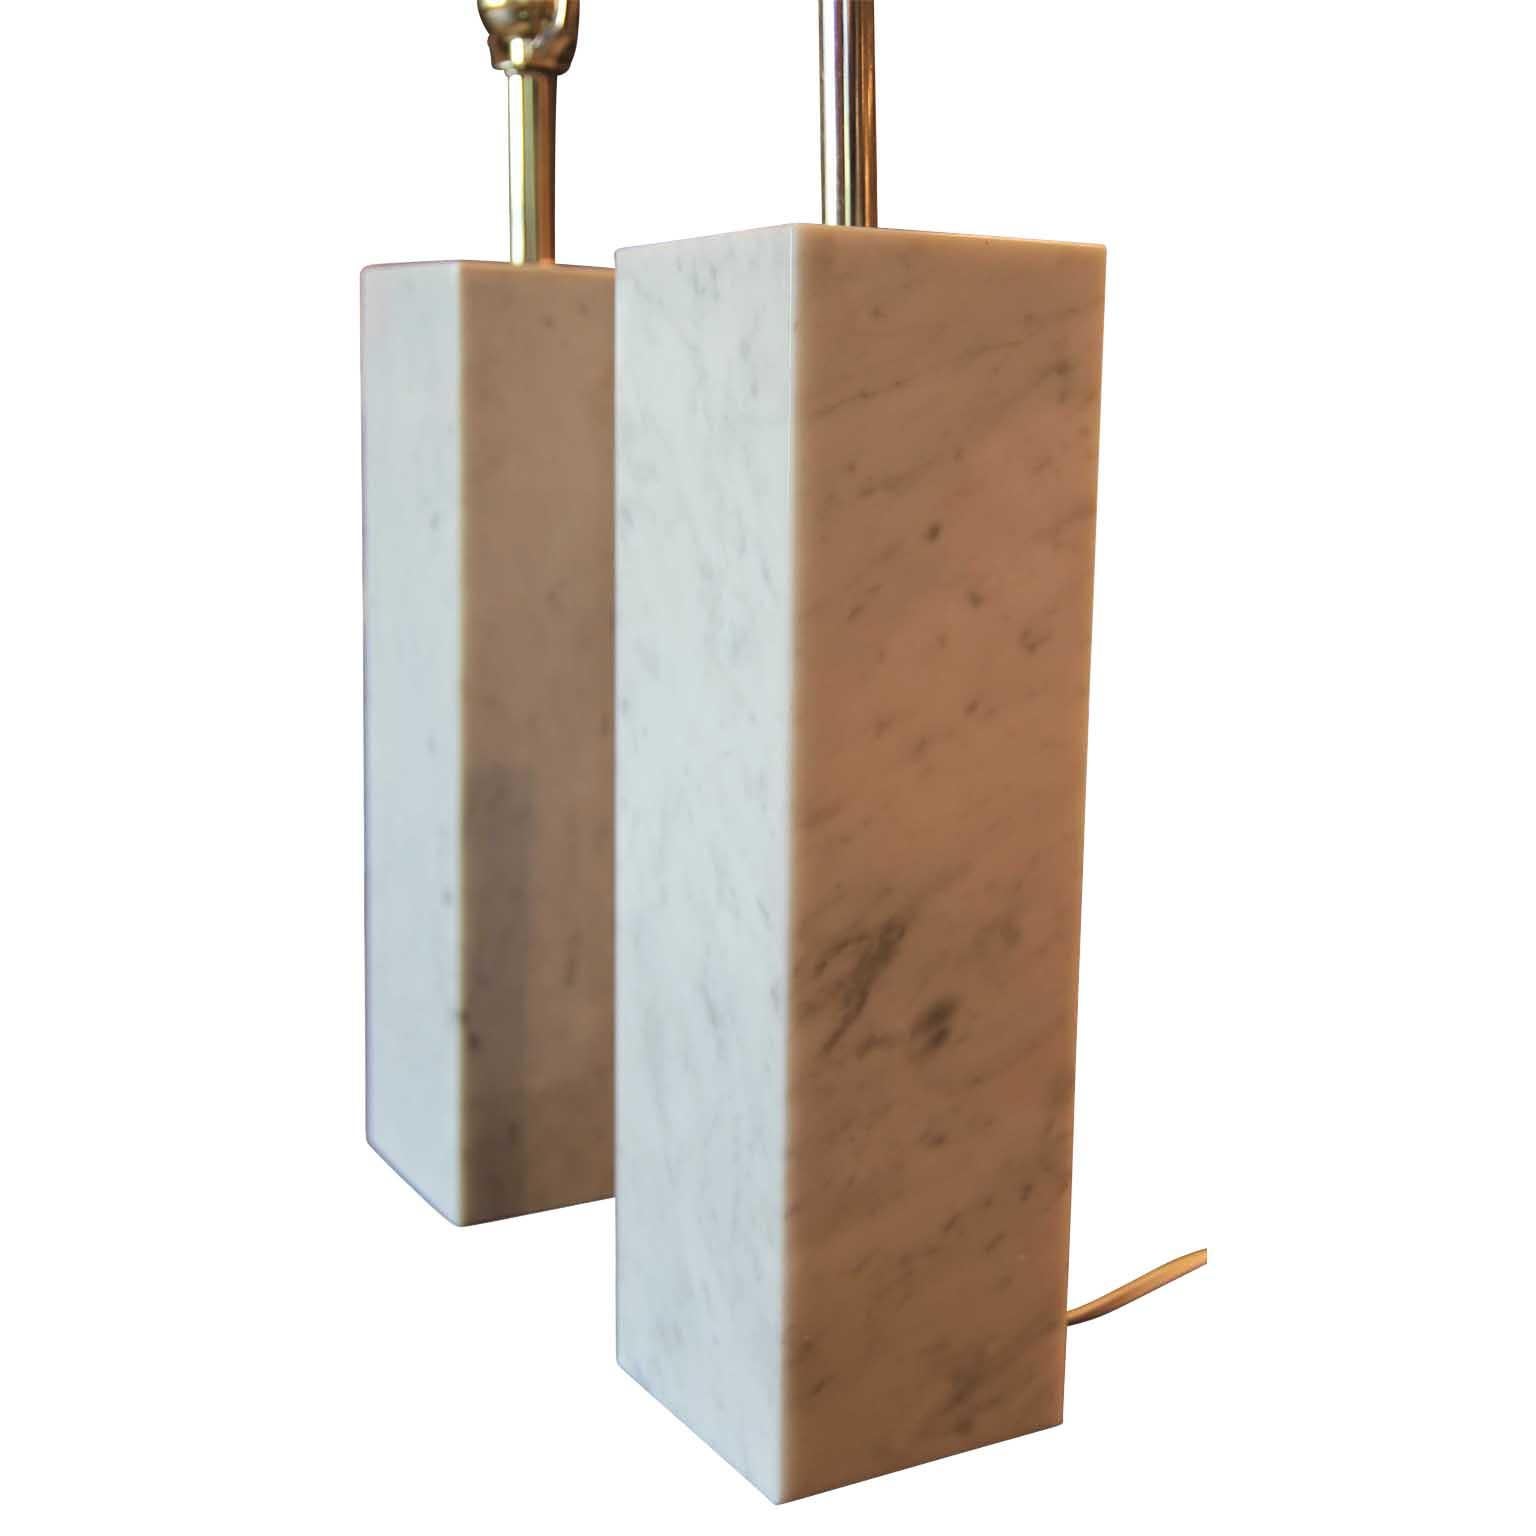 Mid-Century Modern Pair of Rectangular White Marble Lamps Designed by Nessen Lamps